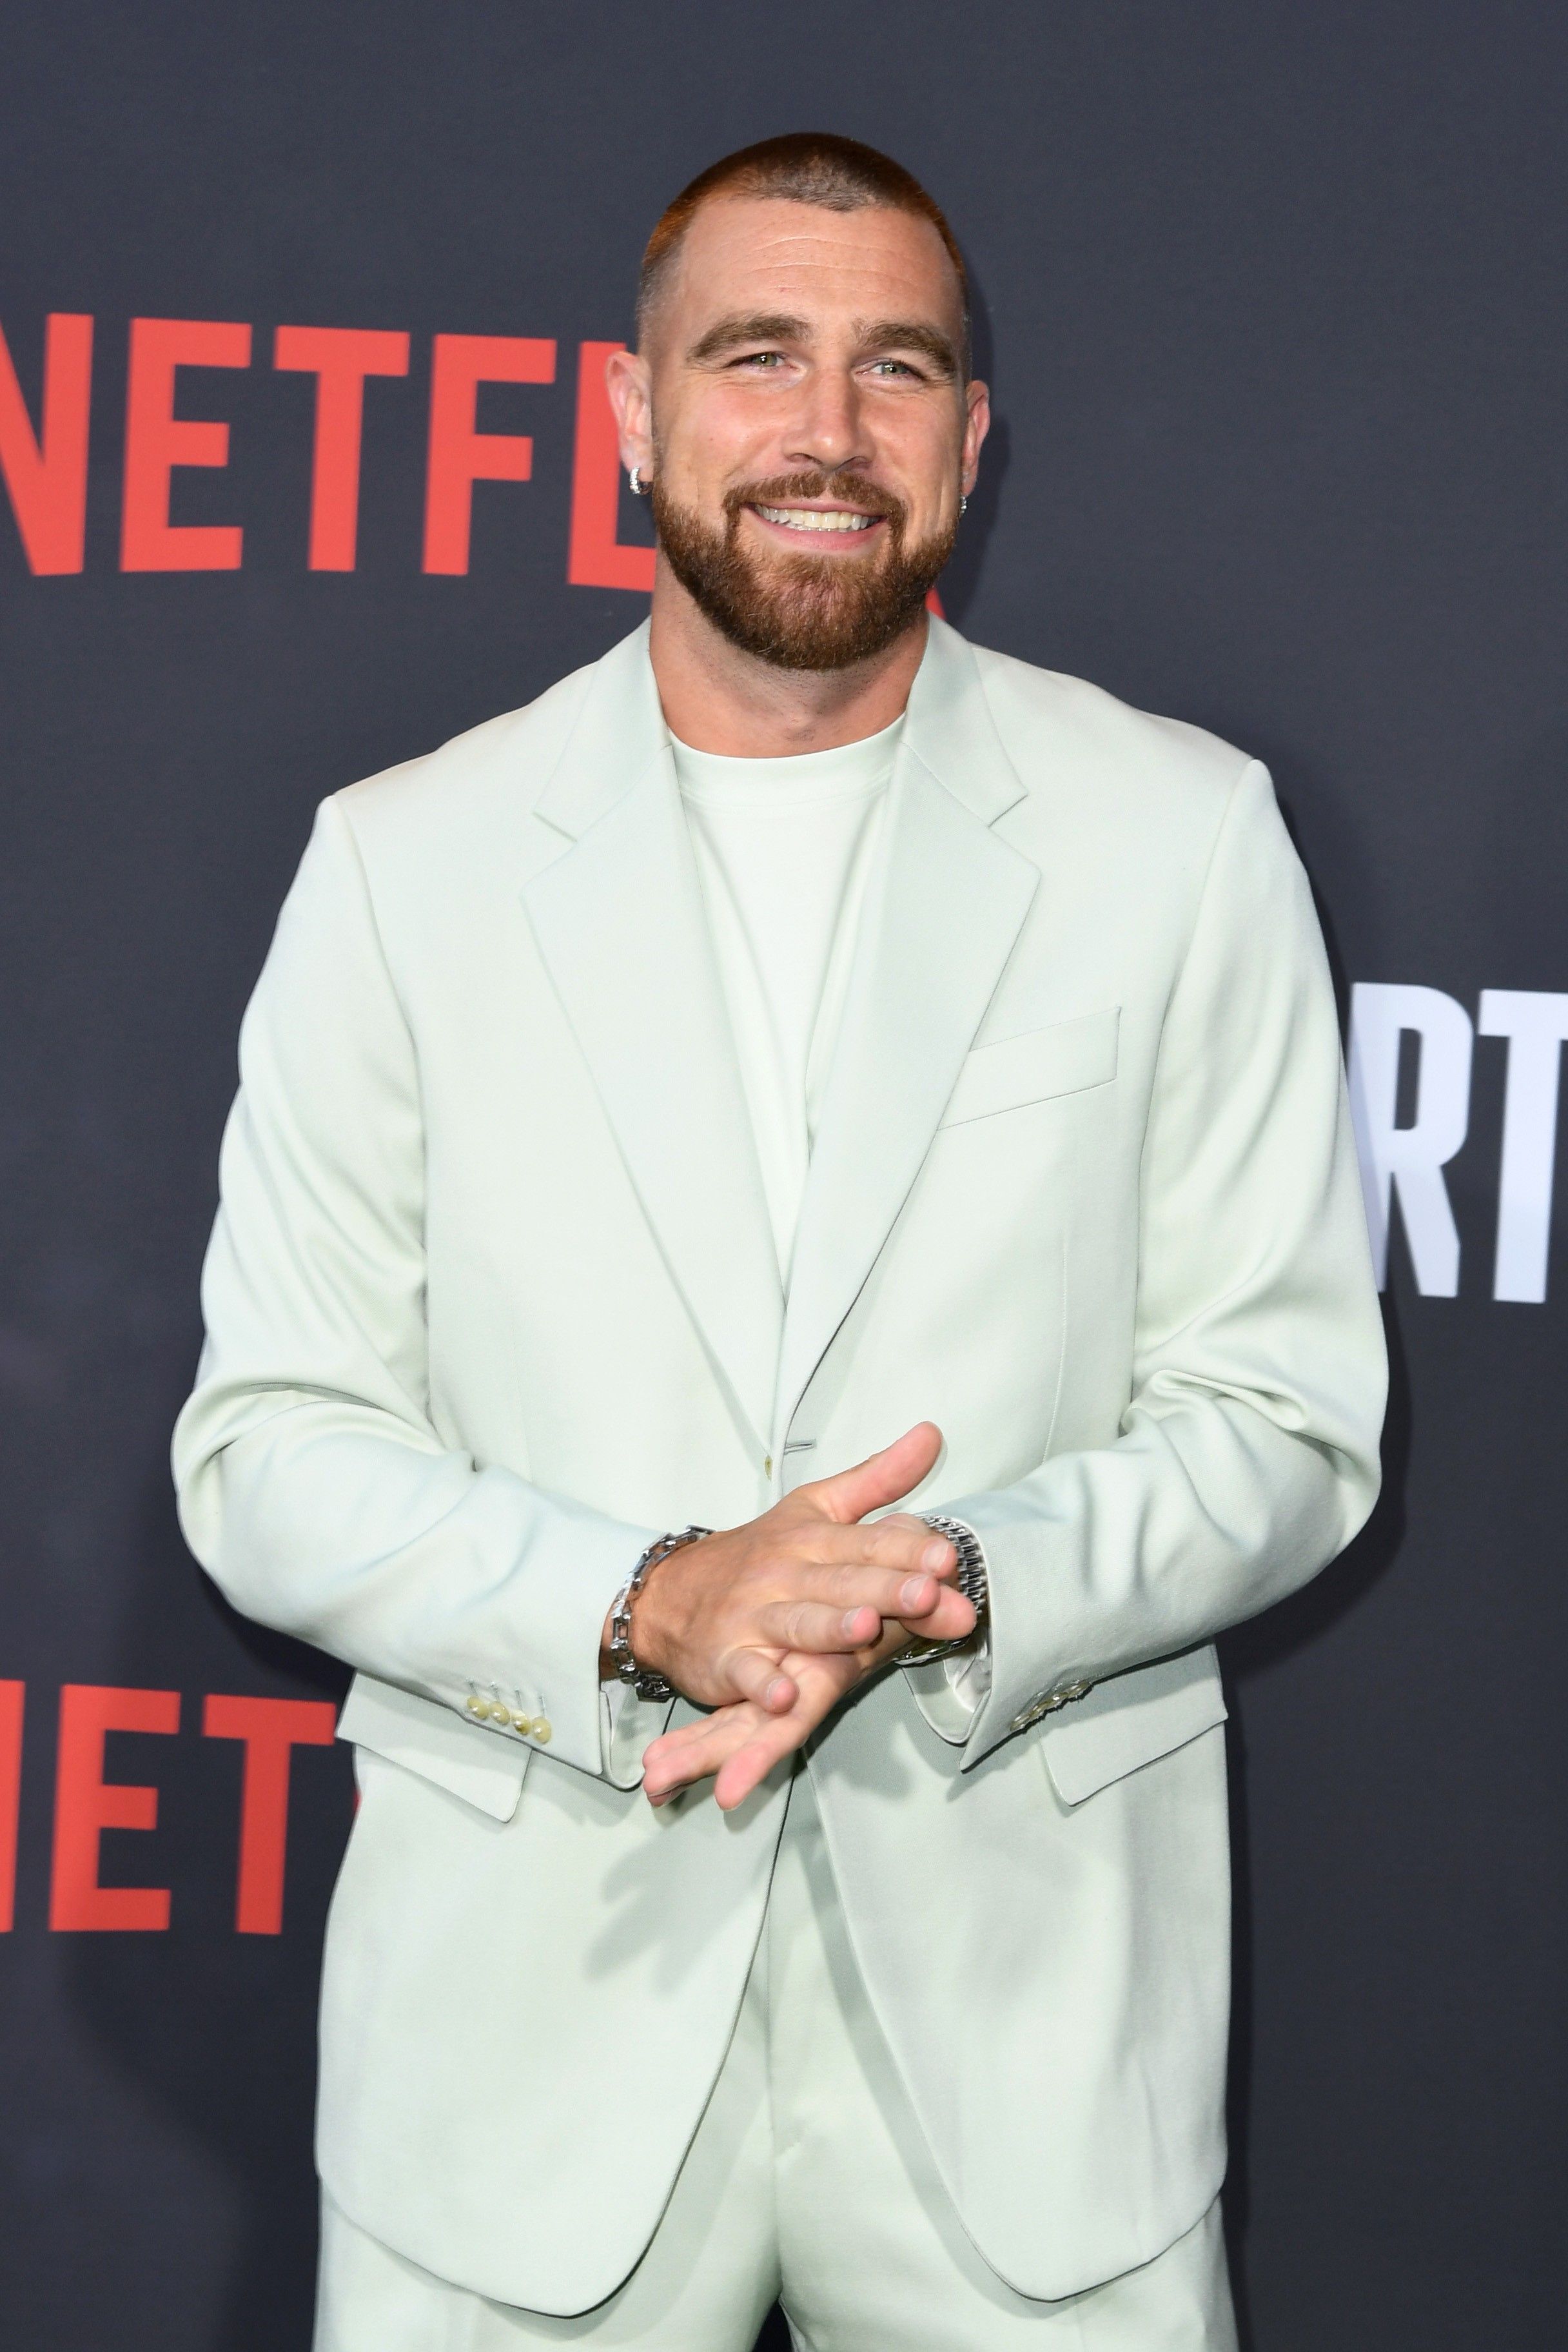 travis kelce to star in ryan murphy's "grotesquerie"